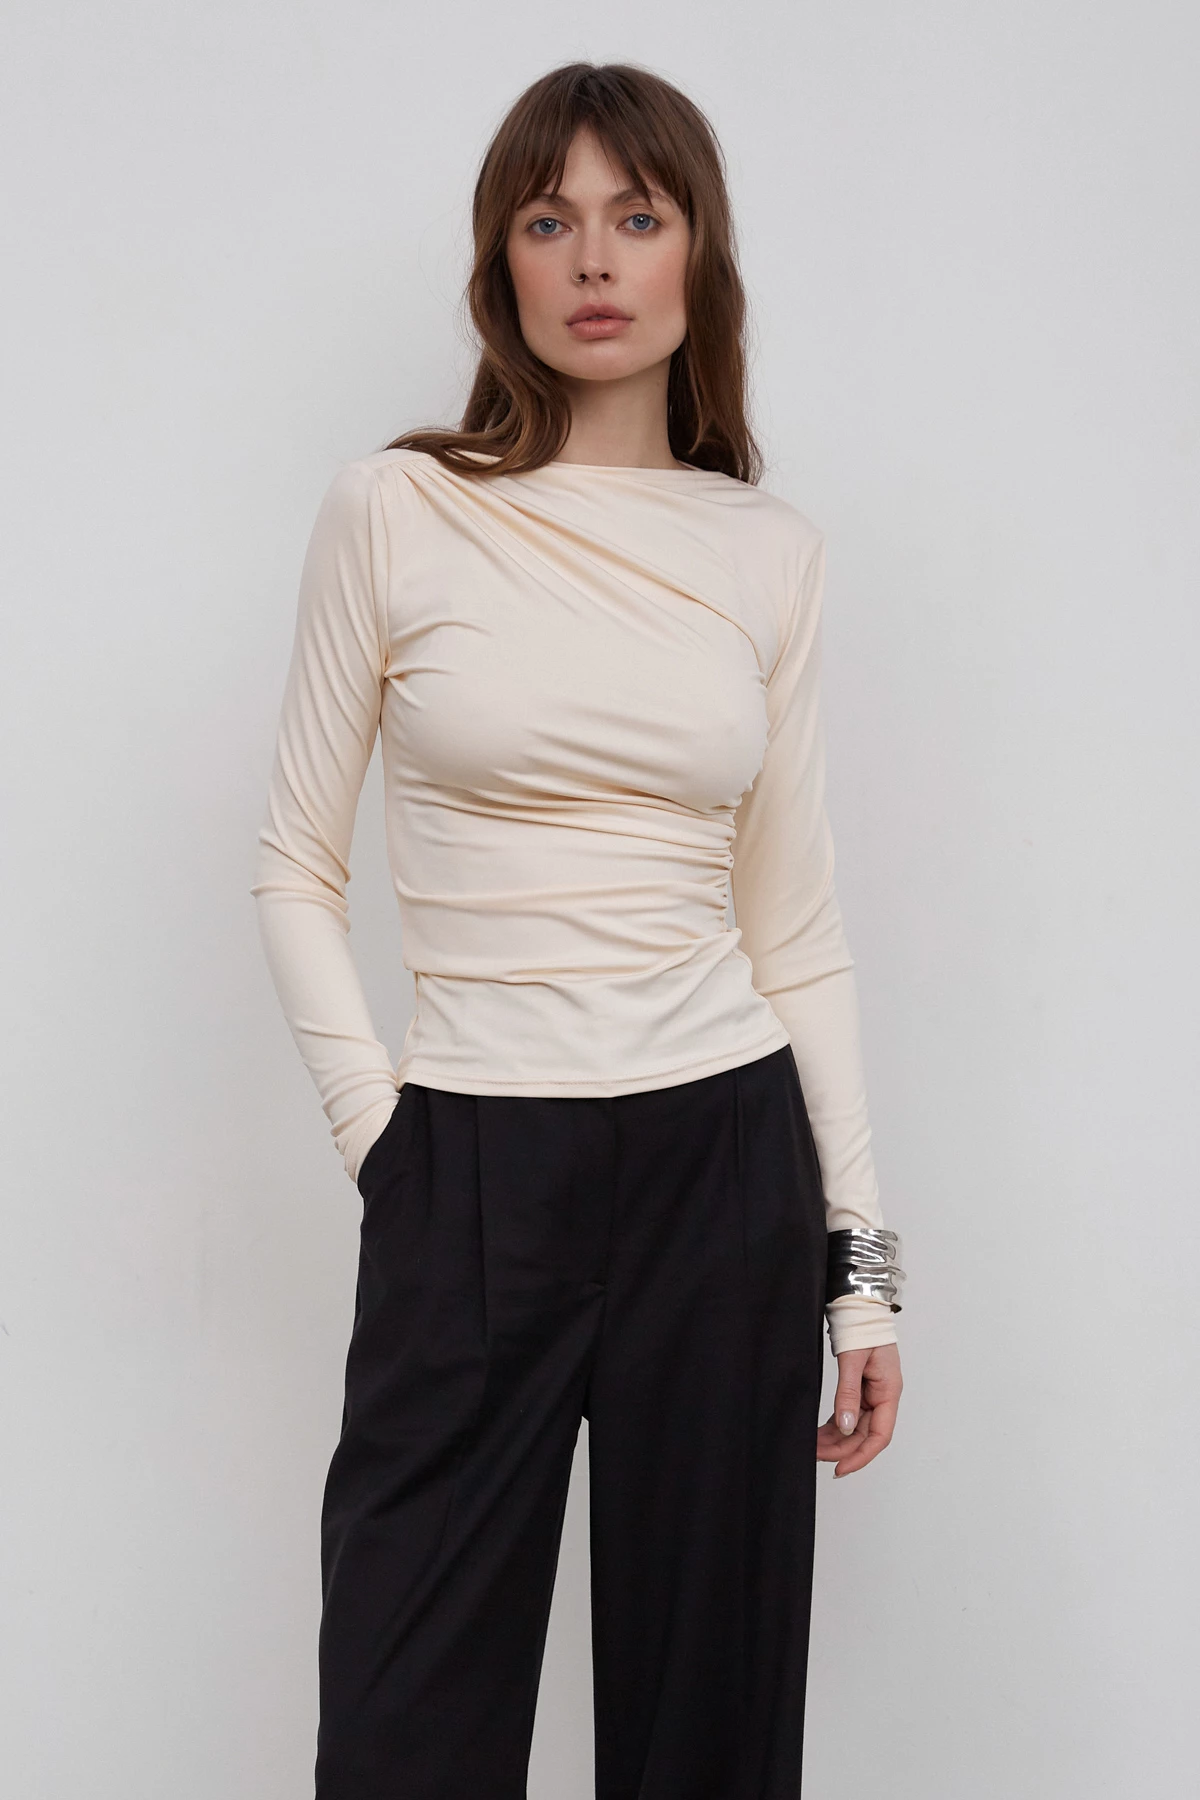 Milky knitted jumper with drape, photo 4